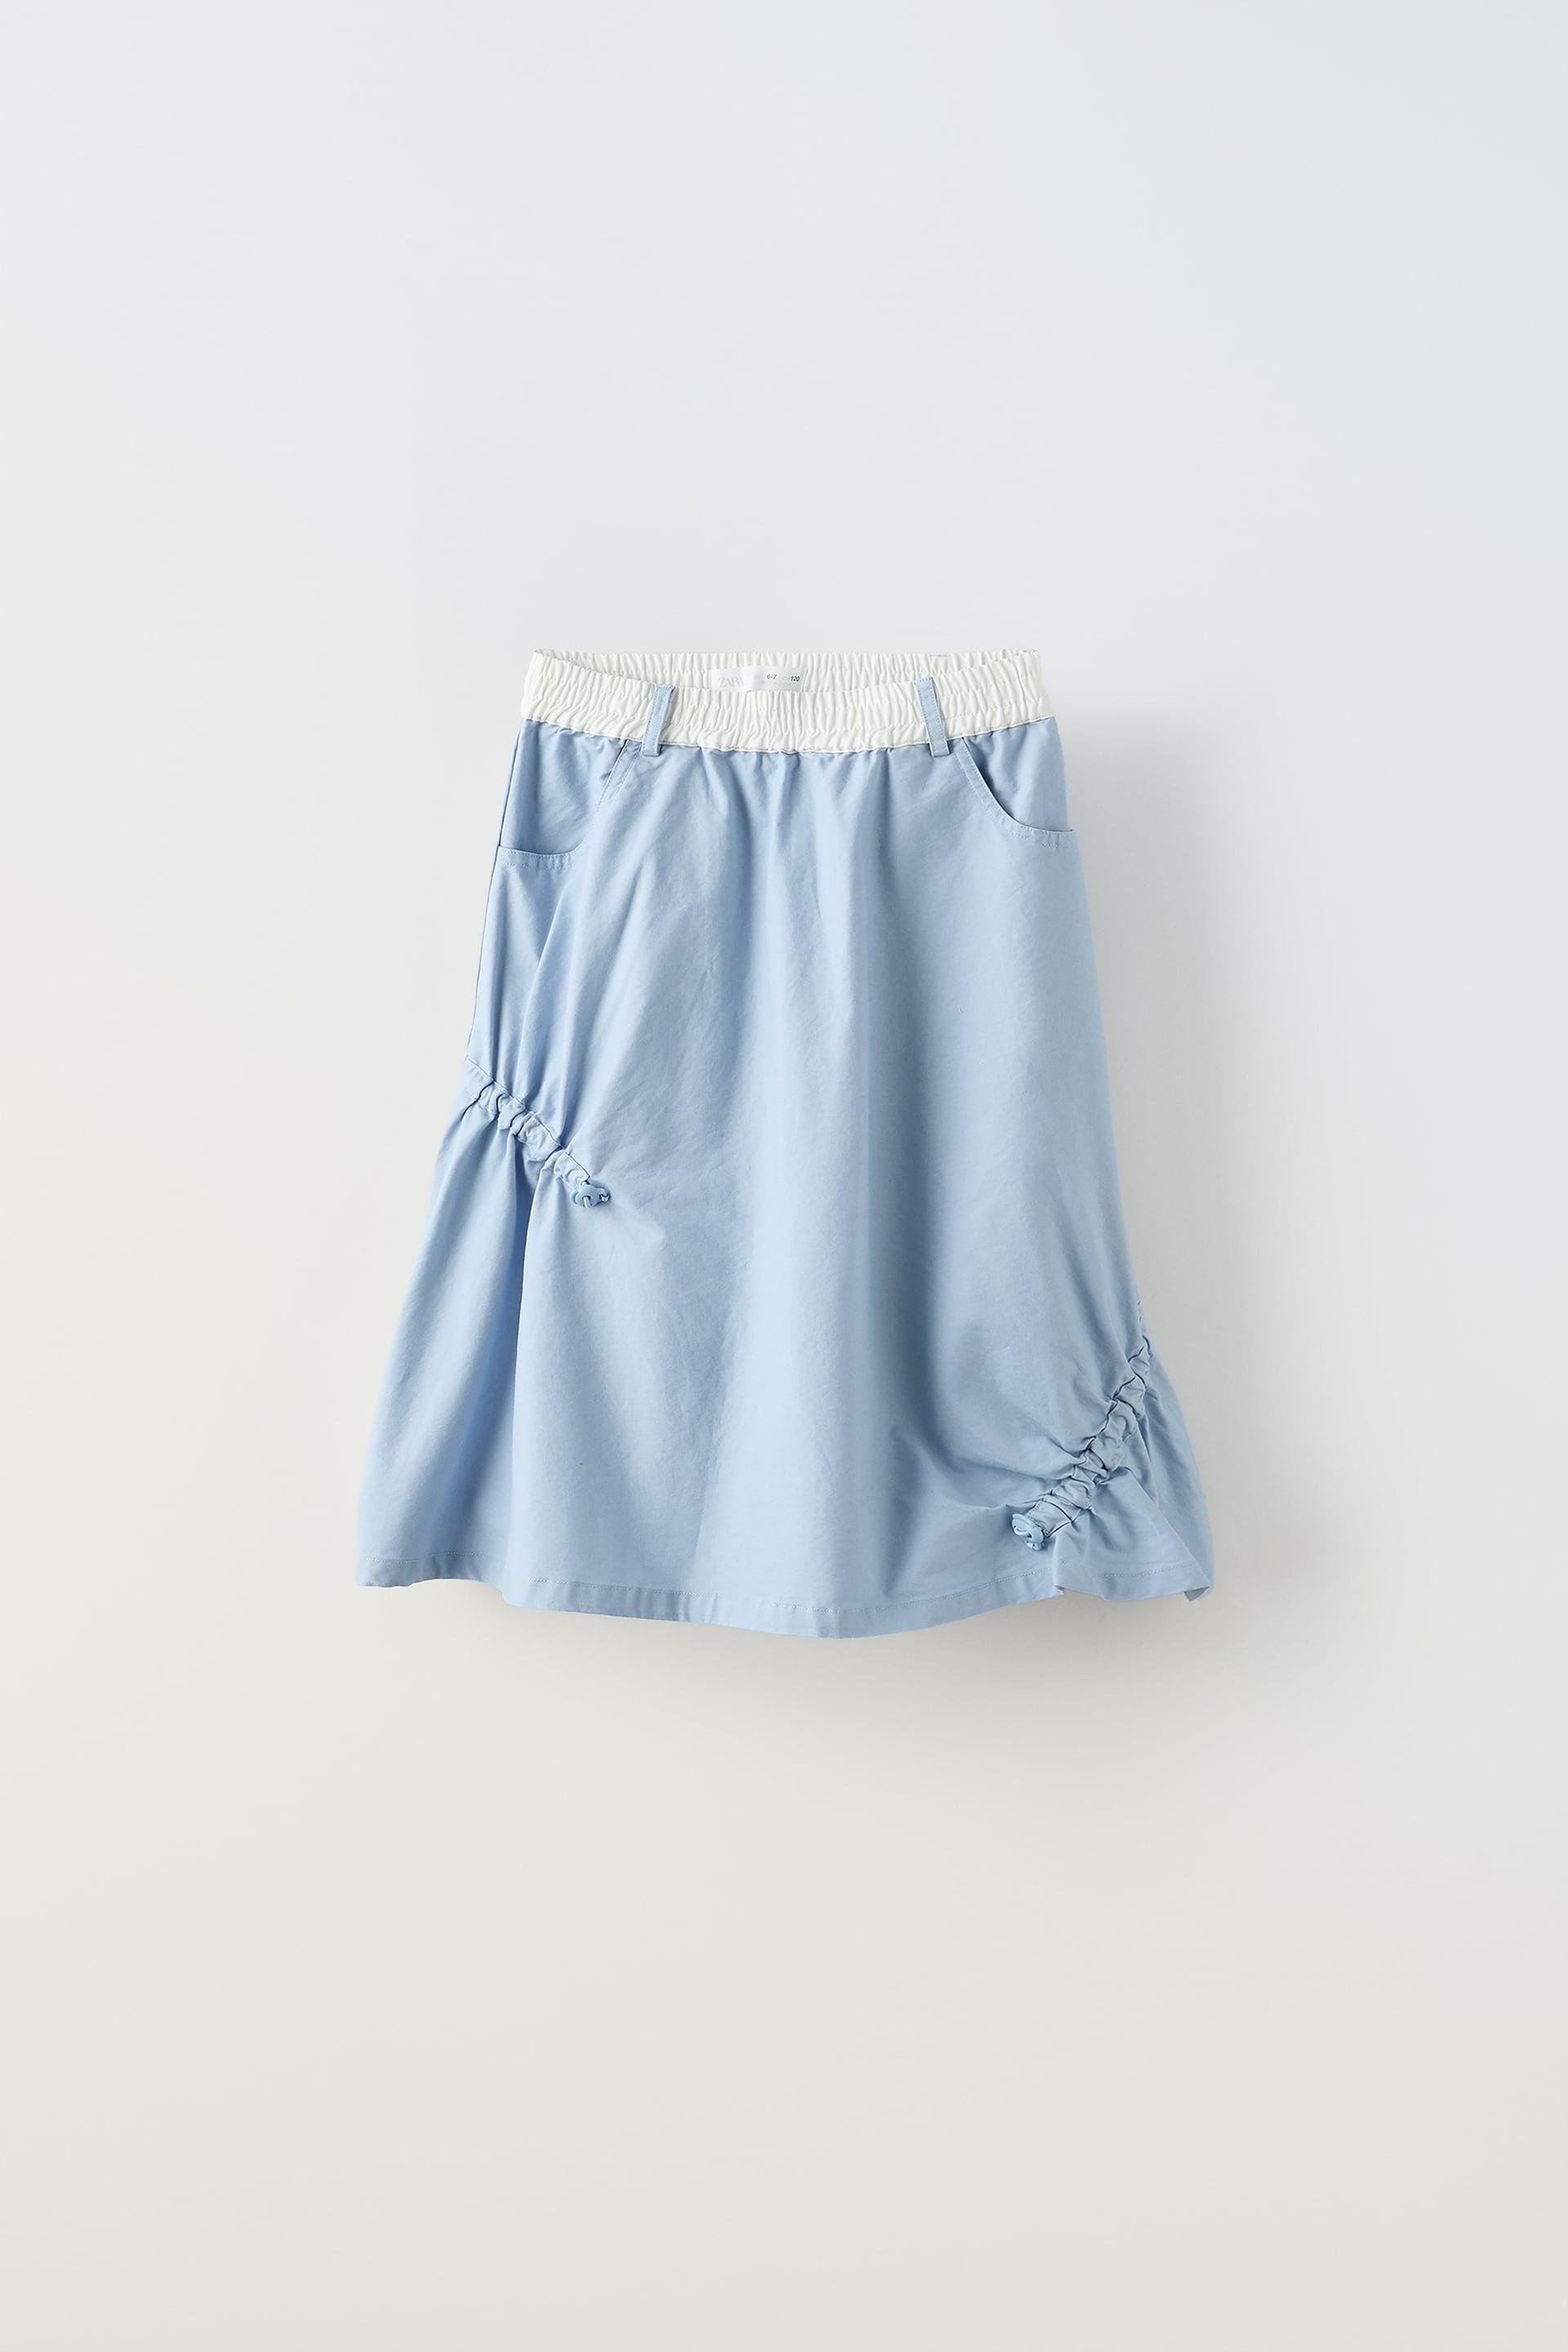 STOPPERS TECHNICAL SKIRT by ZARA